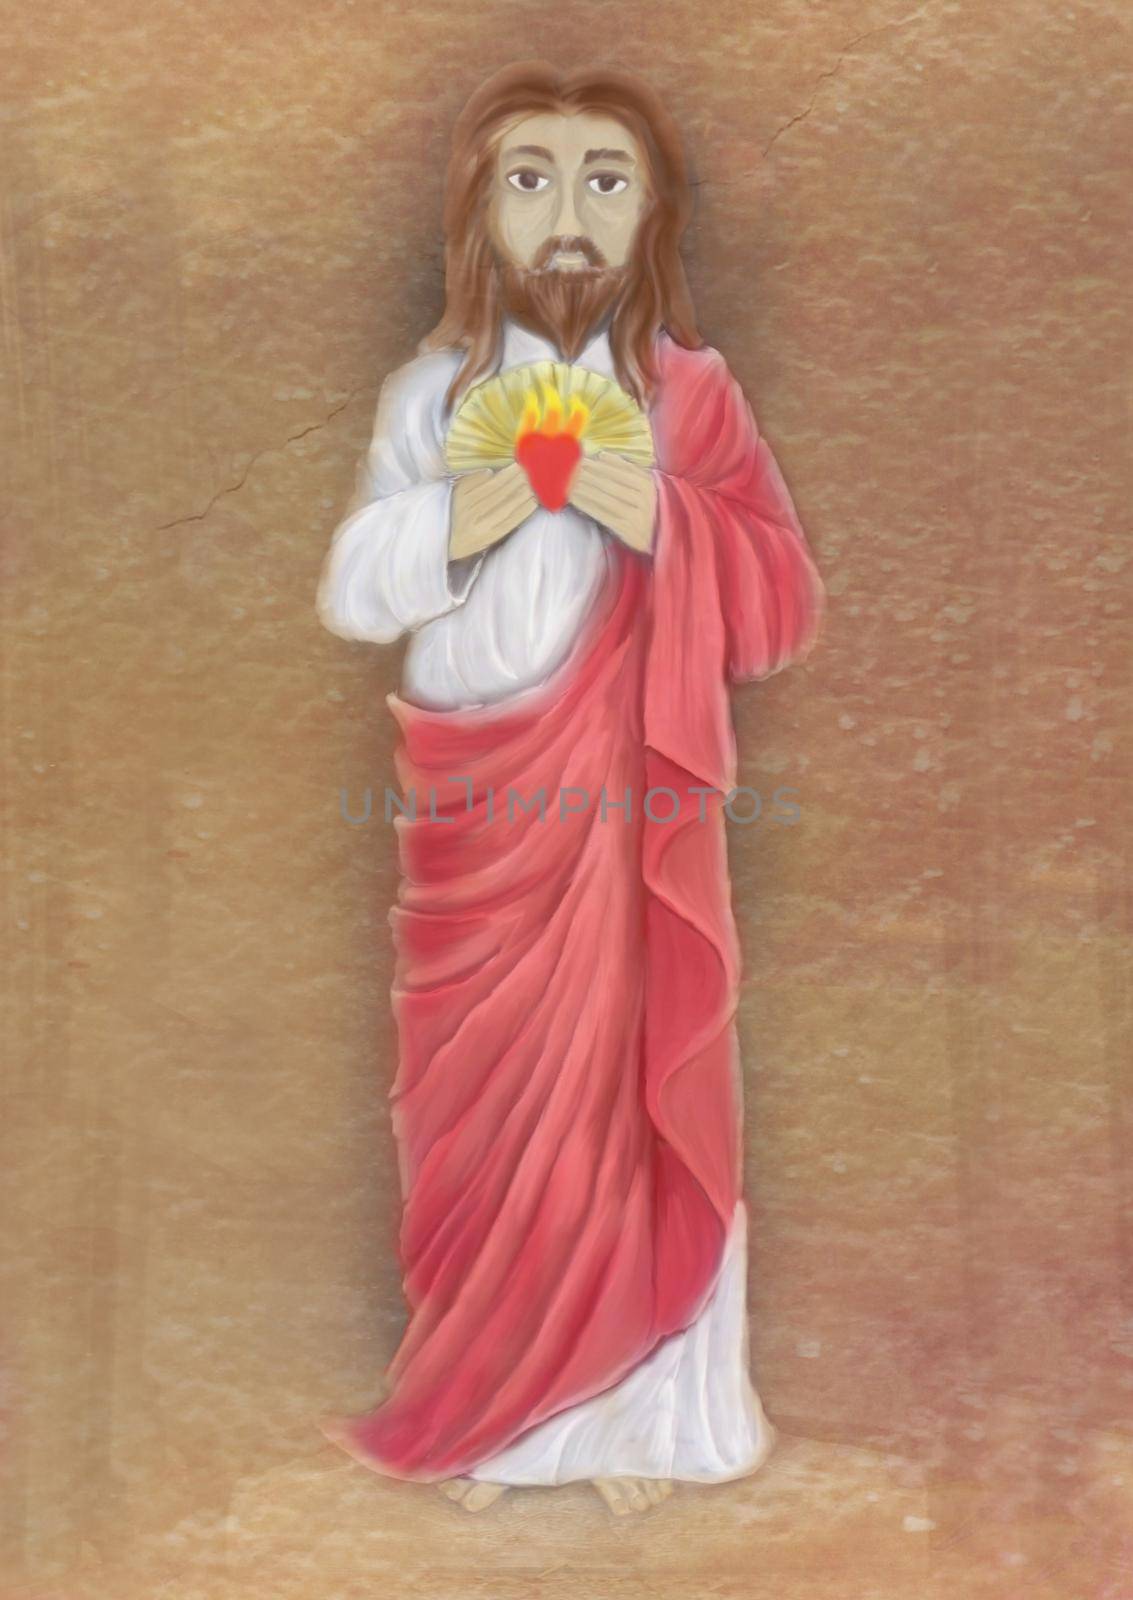 Sacred Heart of Jesus illustration by JackyBrown